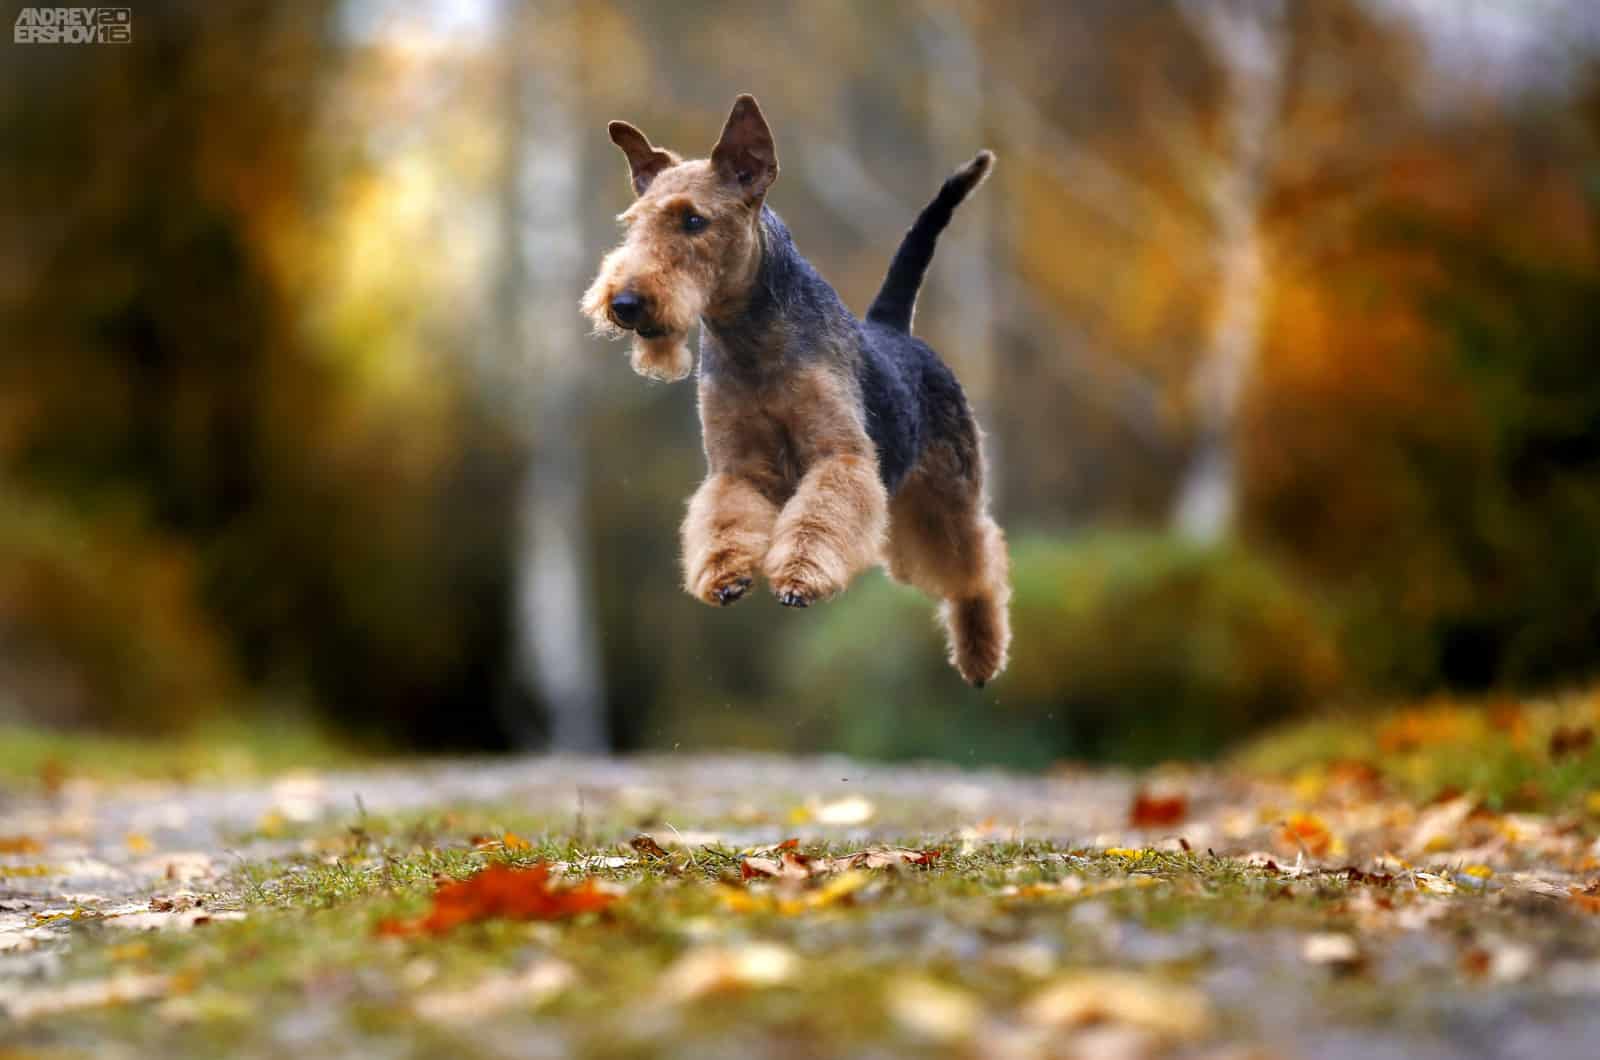 Airedale Terrier jumping in forest